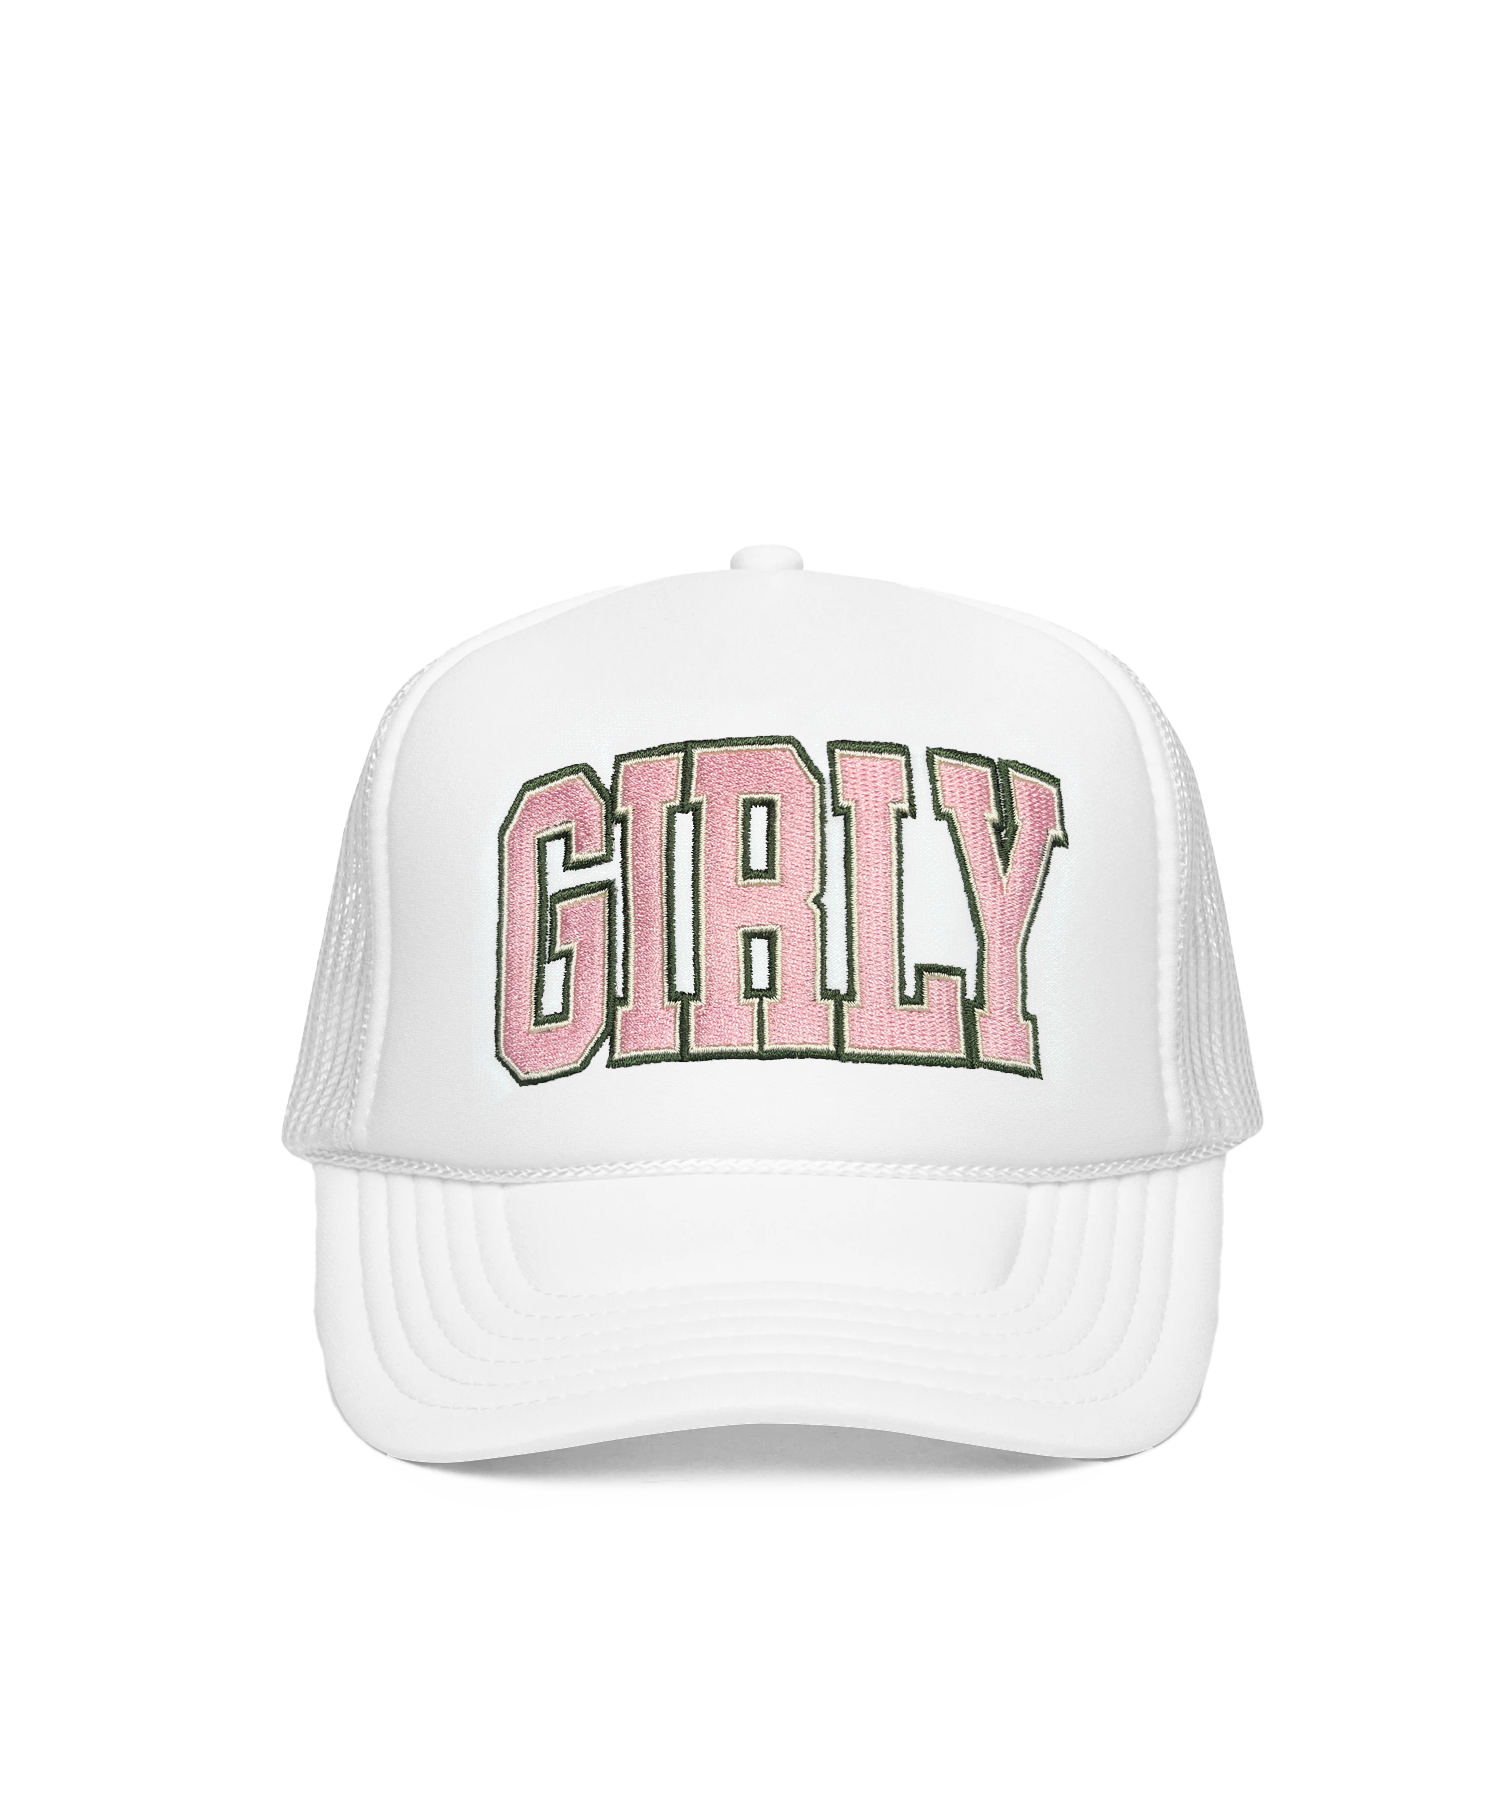 Girly Embroidery Trucker White